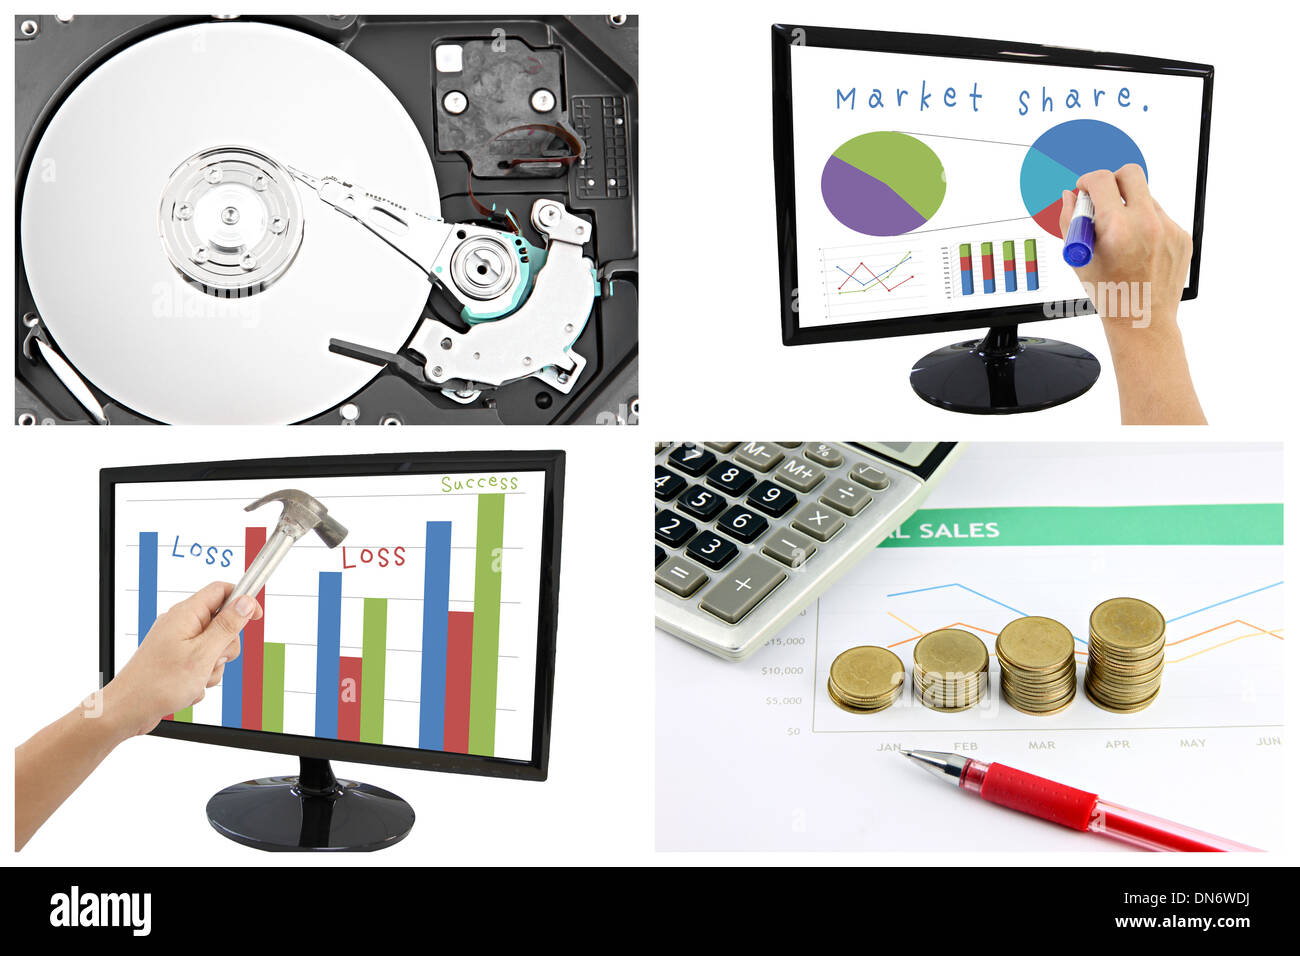 The Picture of Concepts of profit and share data in the business. Stock Photo